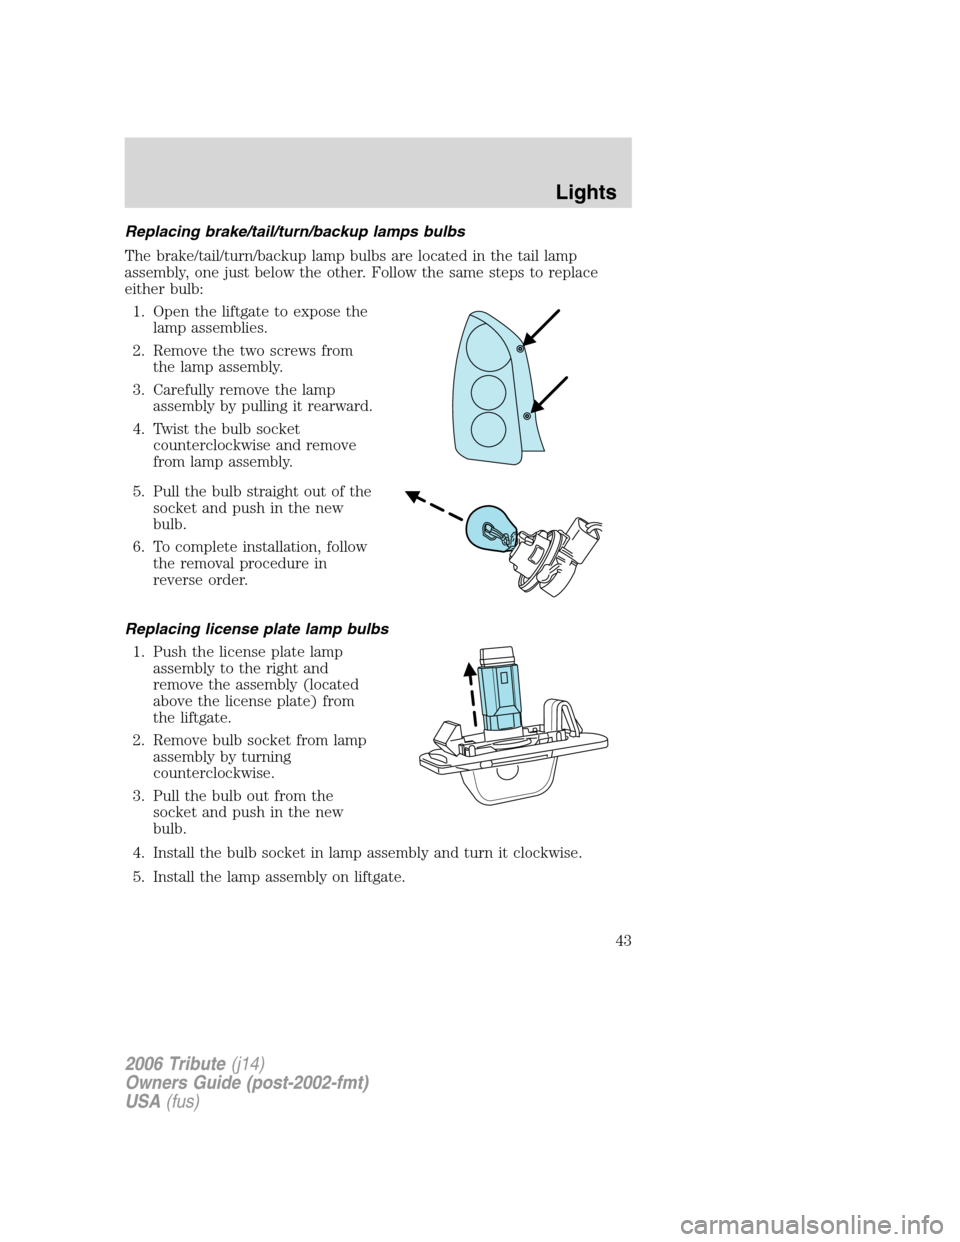 MAZDA MODEL TRIBUTE 2006   (in English) Service Manual Replacing brake/tail/turn/backup lamps bulbs
The brake/tail/turn/backup lamp bulbs are located in the tail lamp
assembly, one just below the other. Follow the same steps to replace
either bulb:
1. Ope